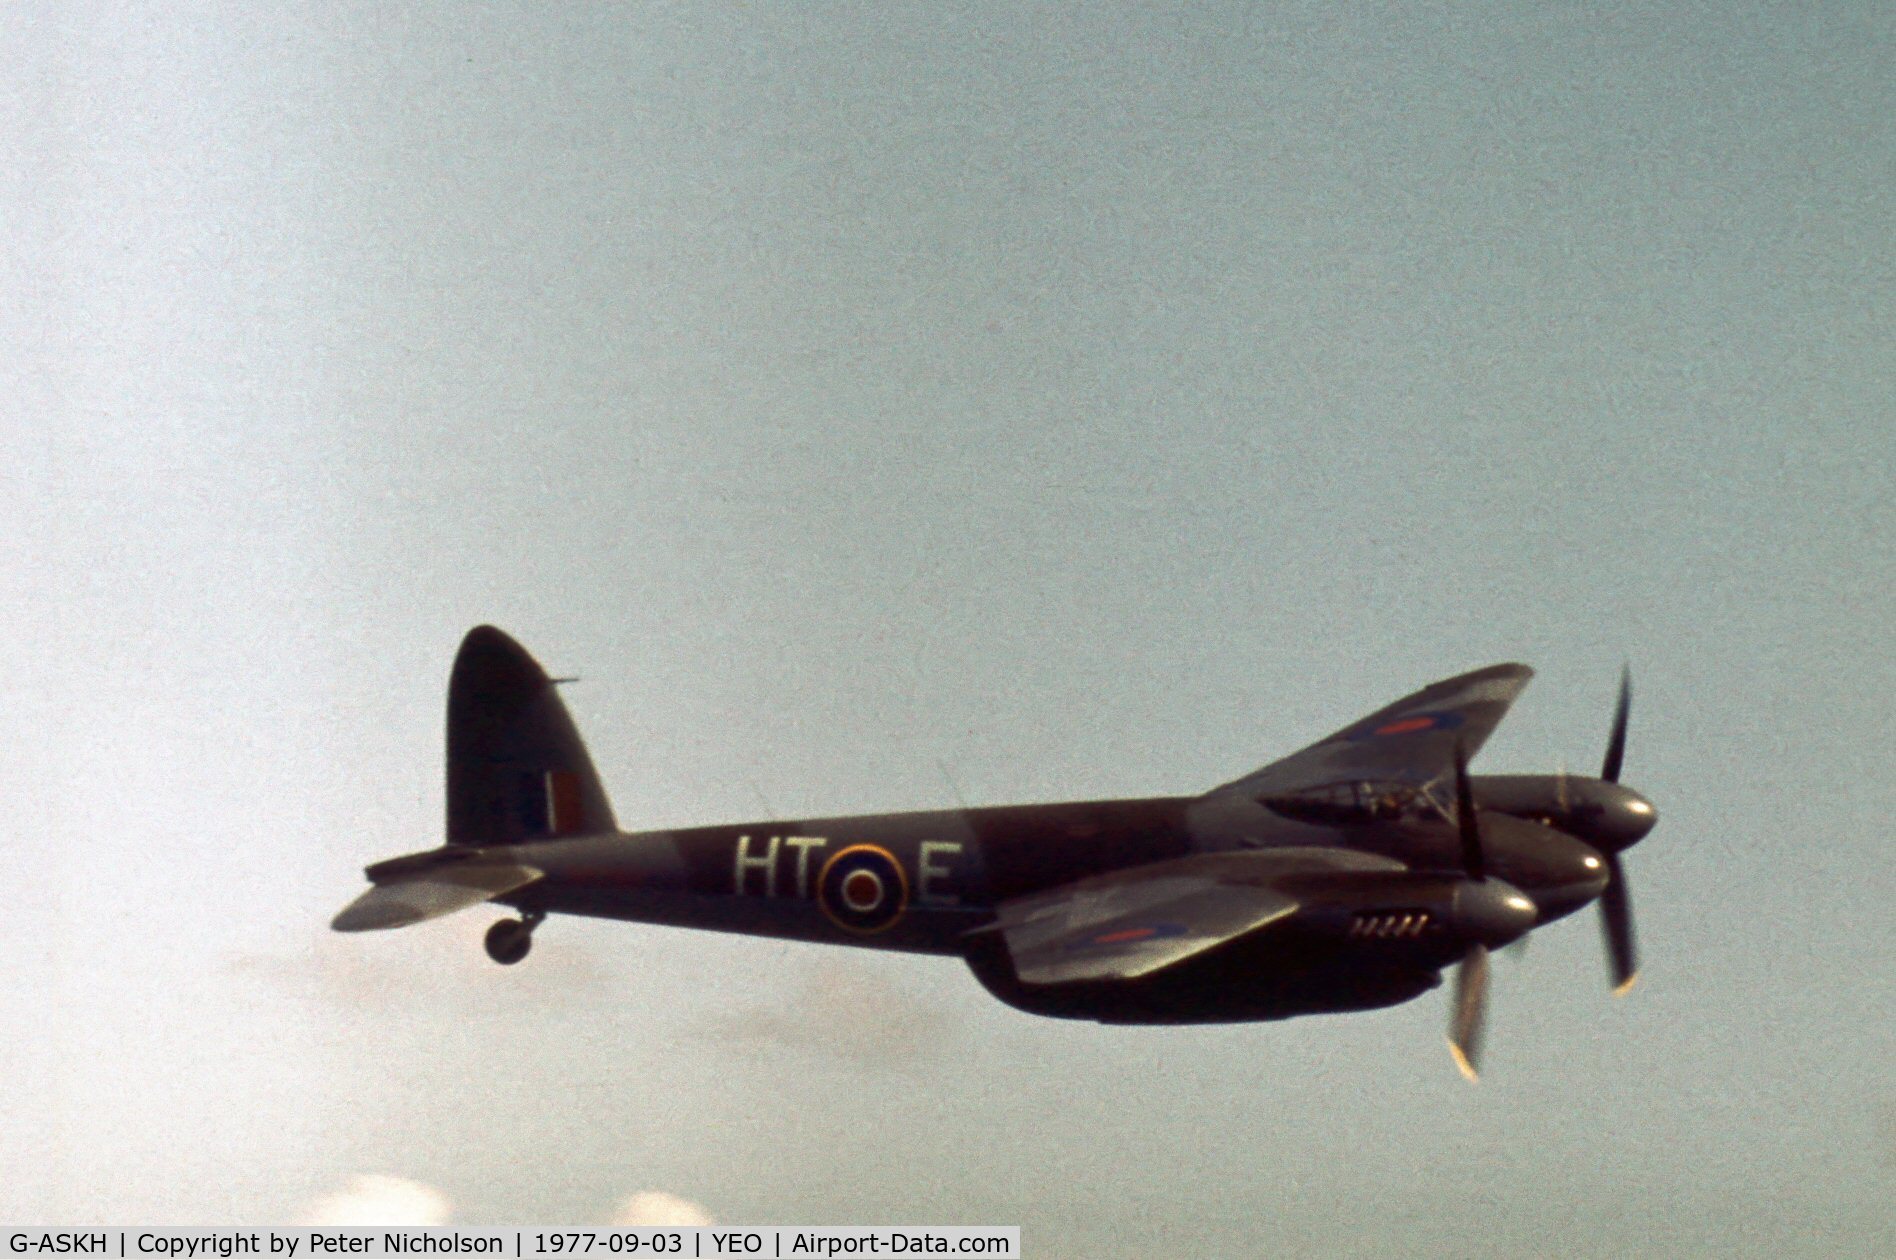 G-ASKH, 1965 De Havilland DH98 Mosquito T.3 C/N RR299, The Rolls-Royce Mosquito T.3 in action at the 1977 RNAS Yeovilton Air Day.